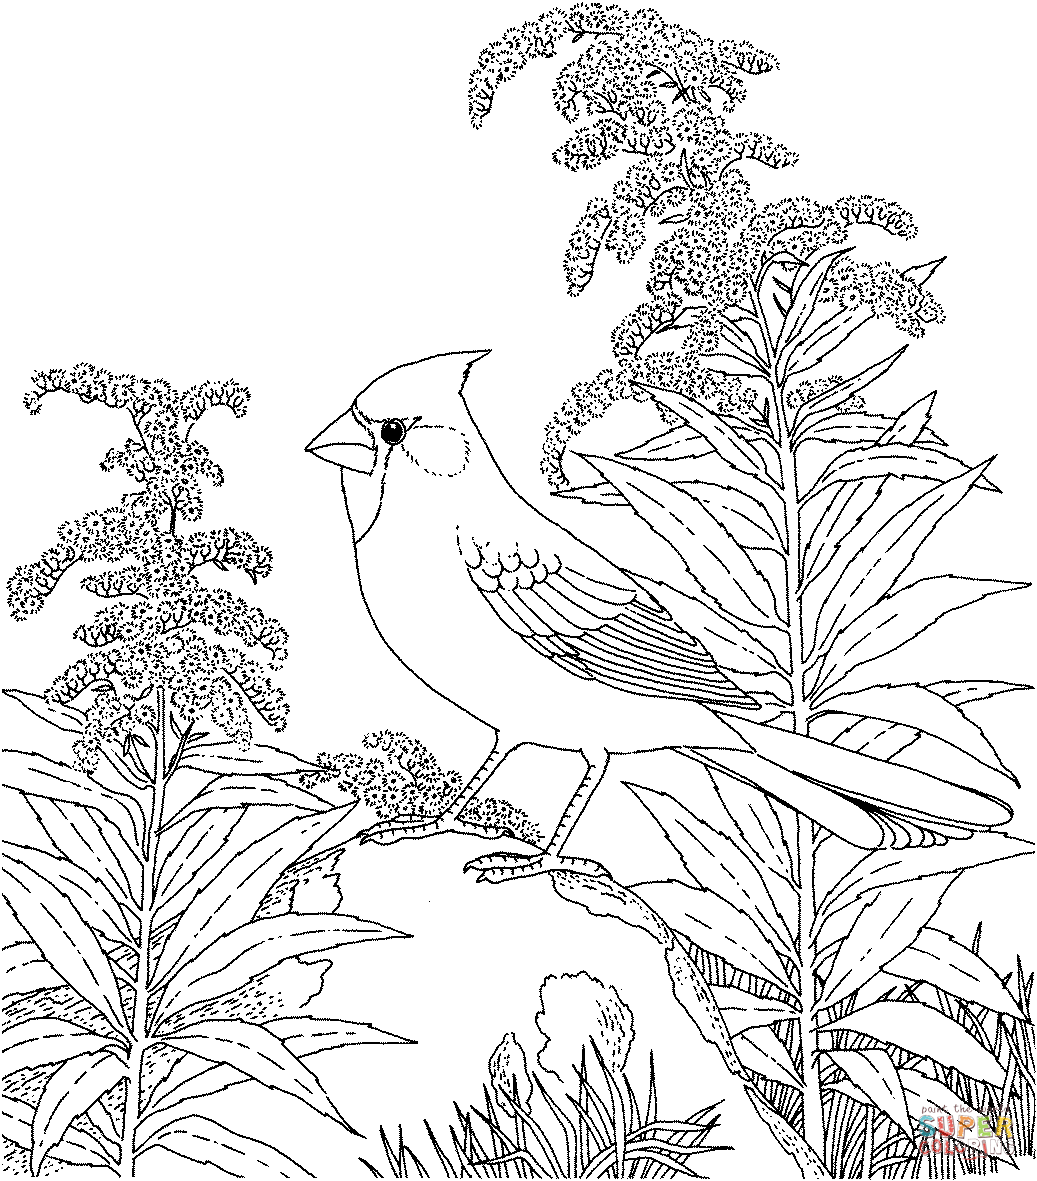 Northern Cardinal and Goldenrod Kentucky Bird and Flower Coloring Pages